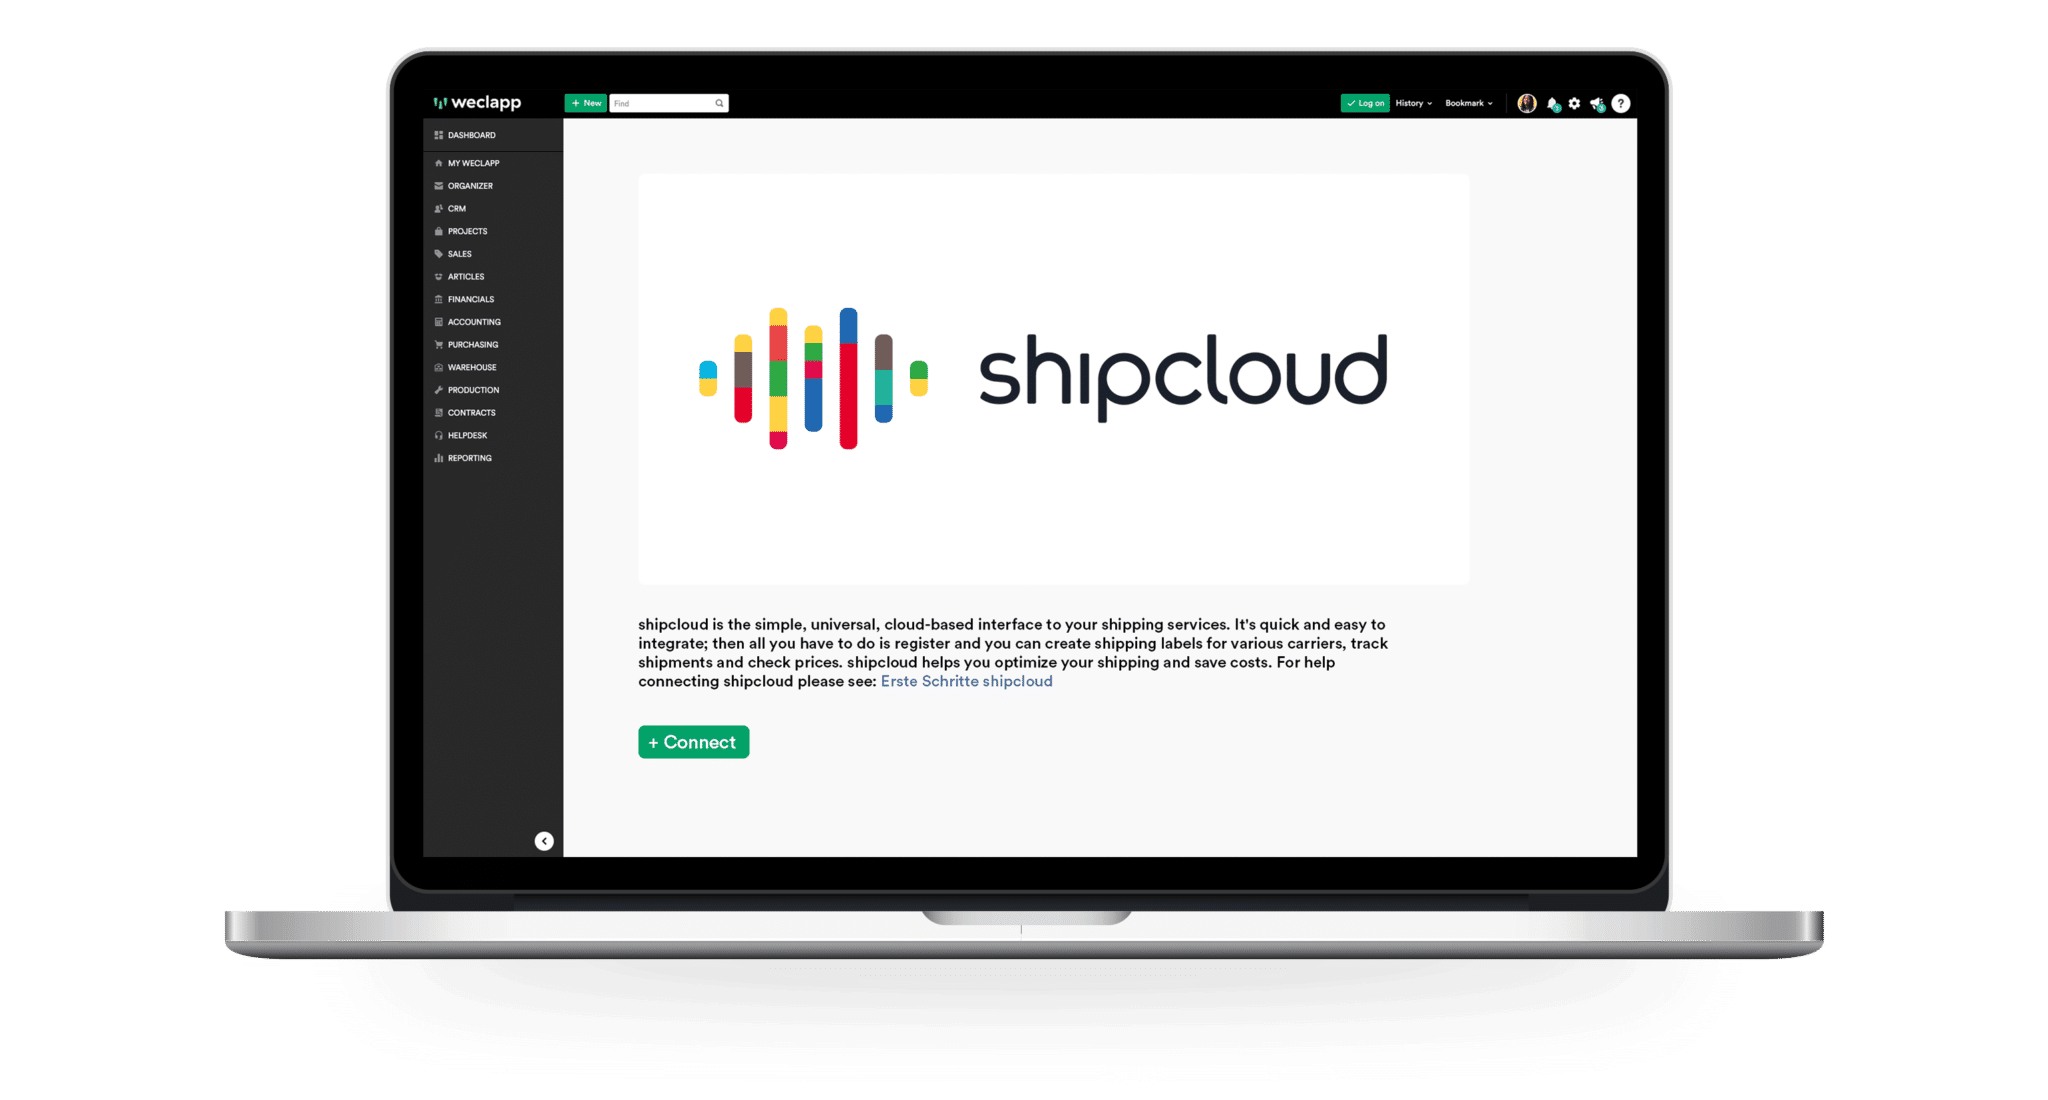 integration weclapp and shipcloud